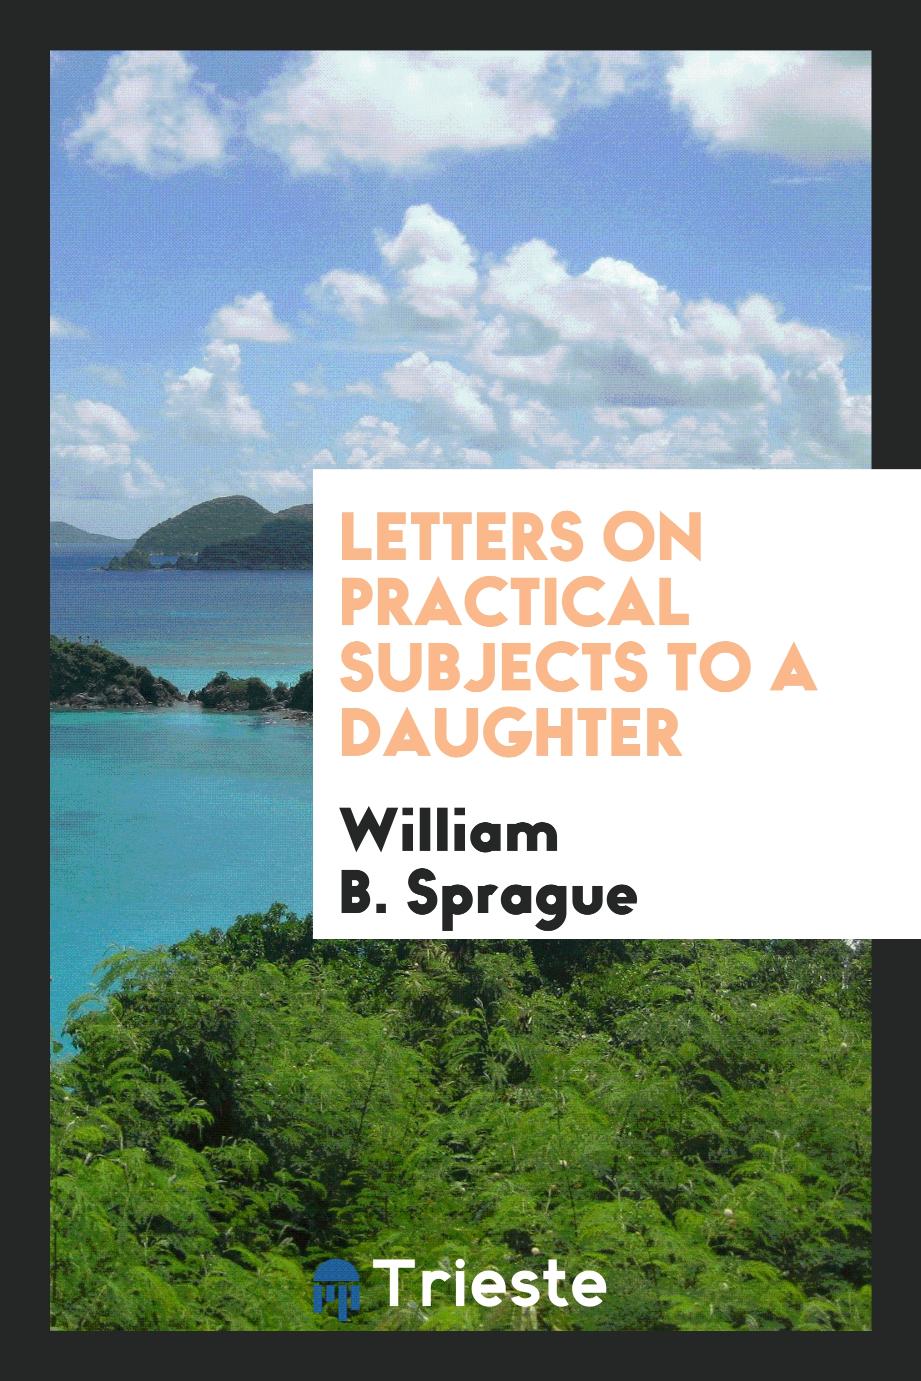 Letters on practical subjects to a daughter